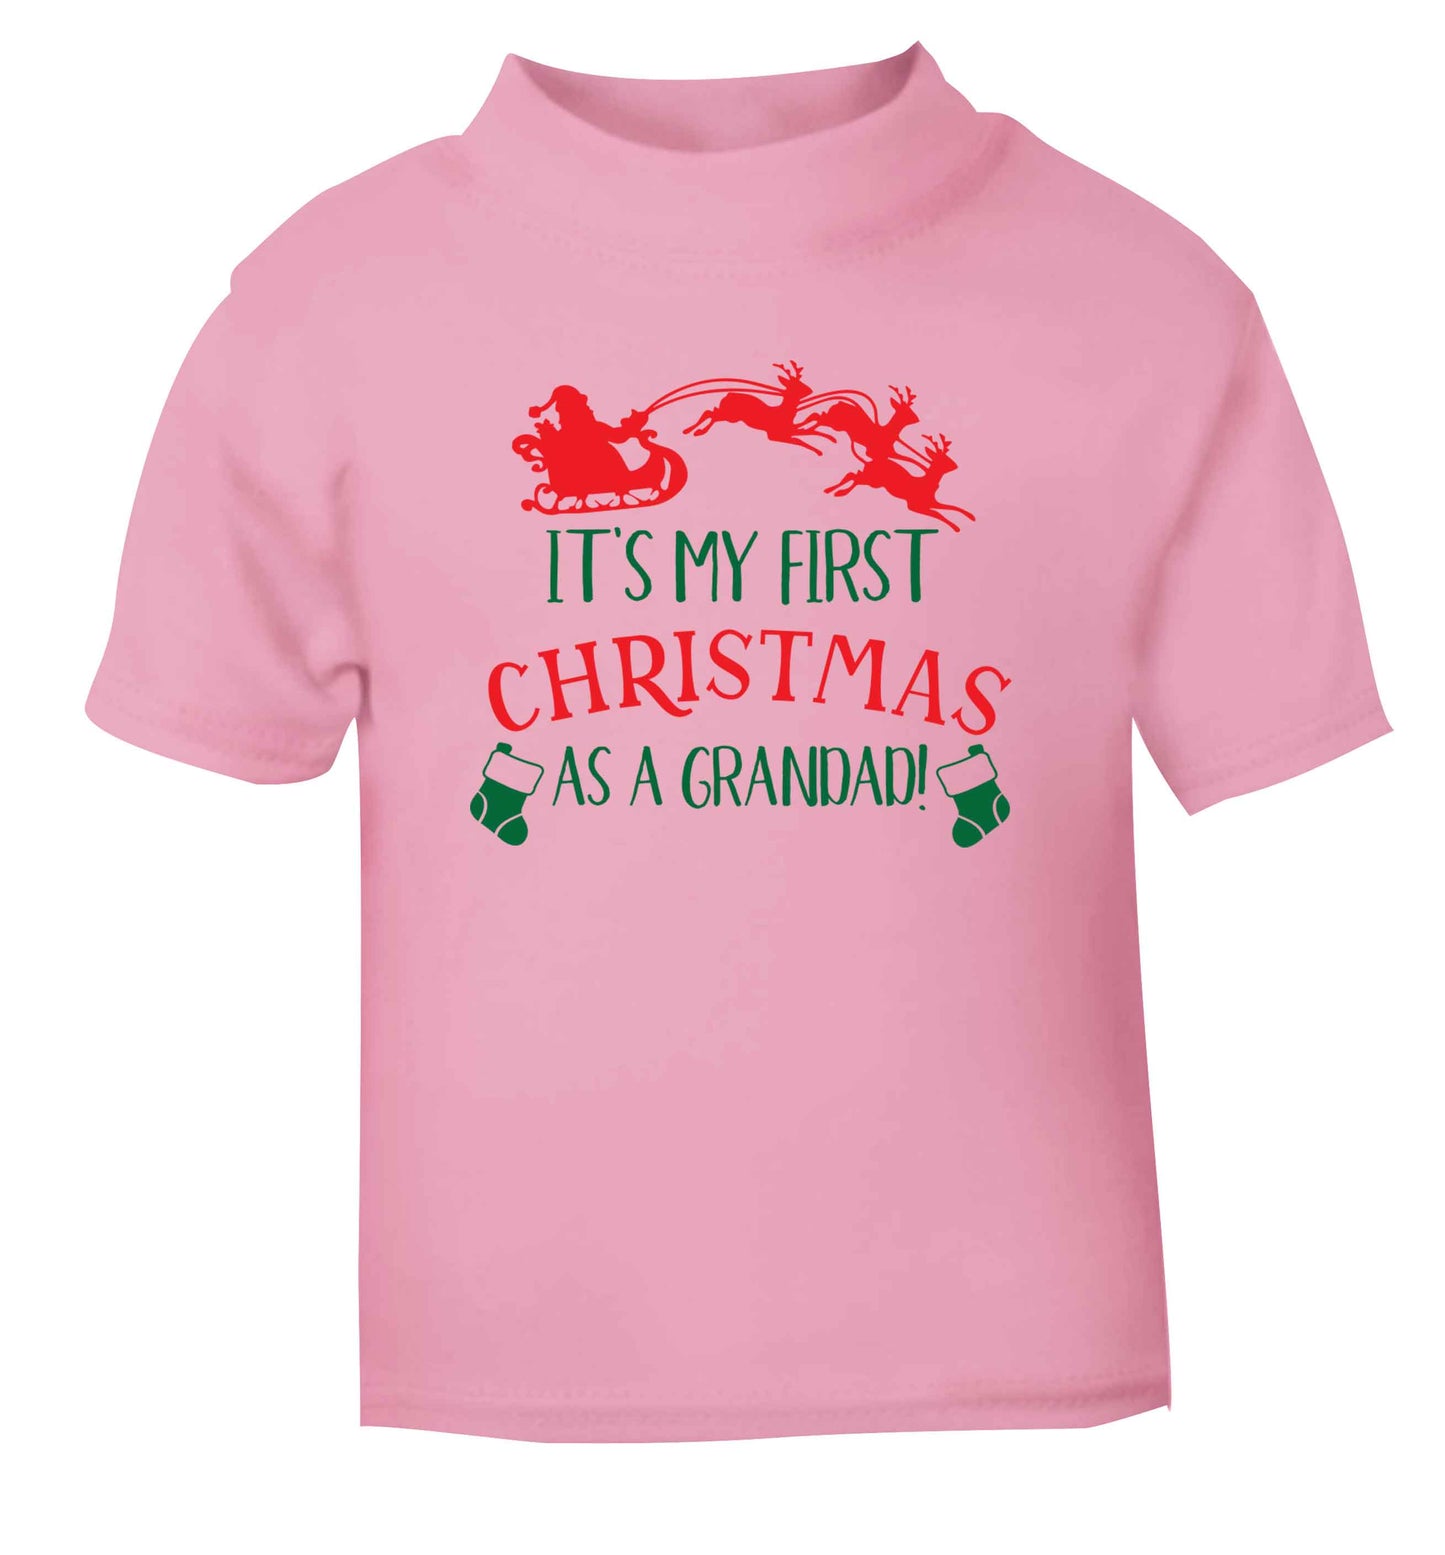 It's my first Christmas as a grandad! light pink Baby Toddler Tshirt 2 Years